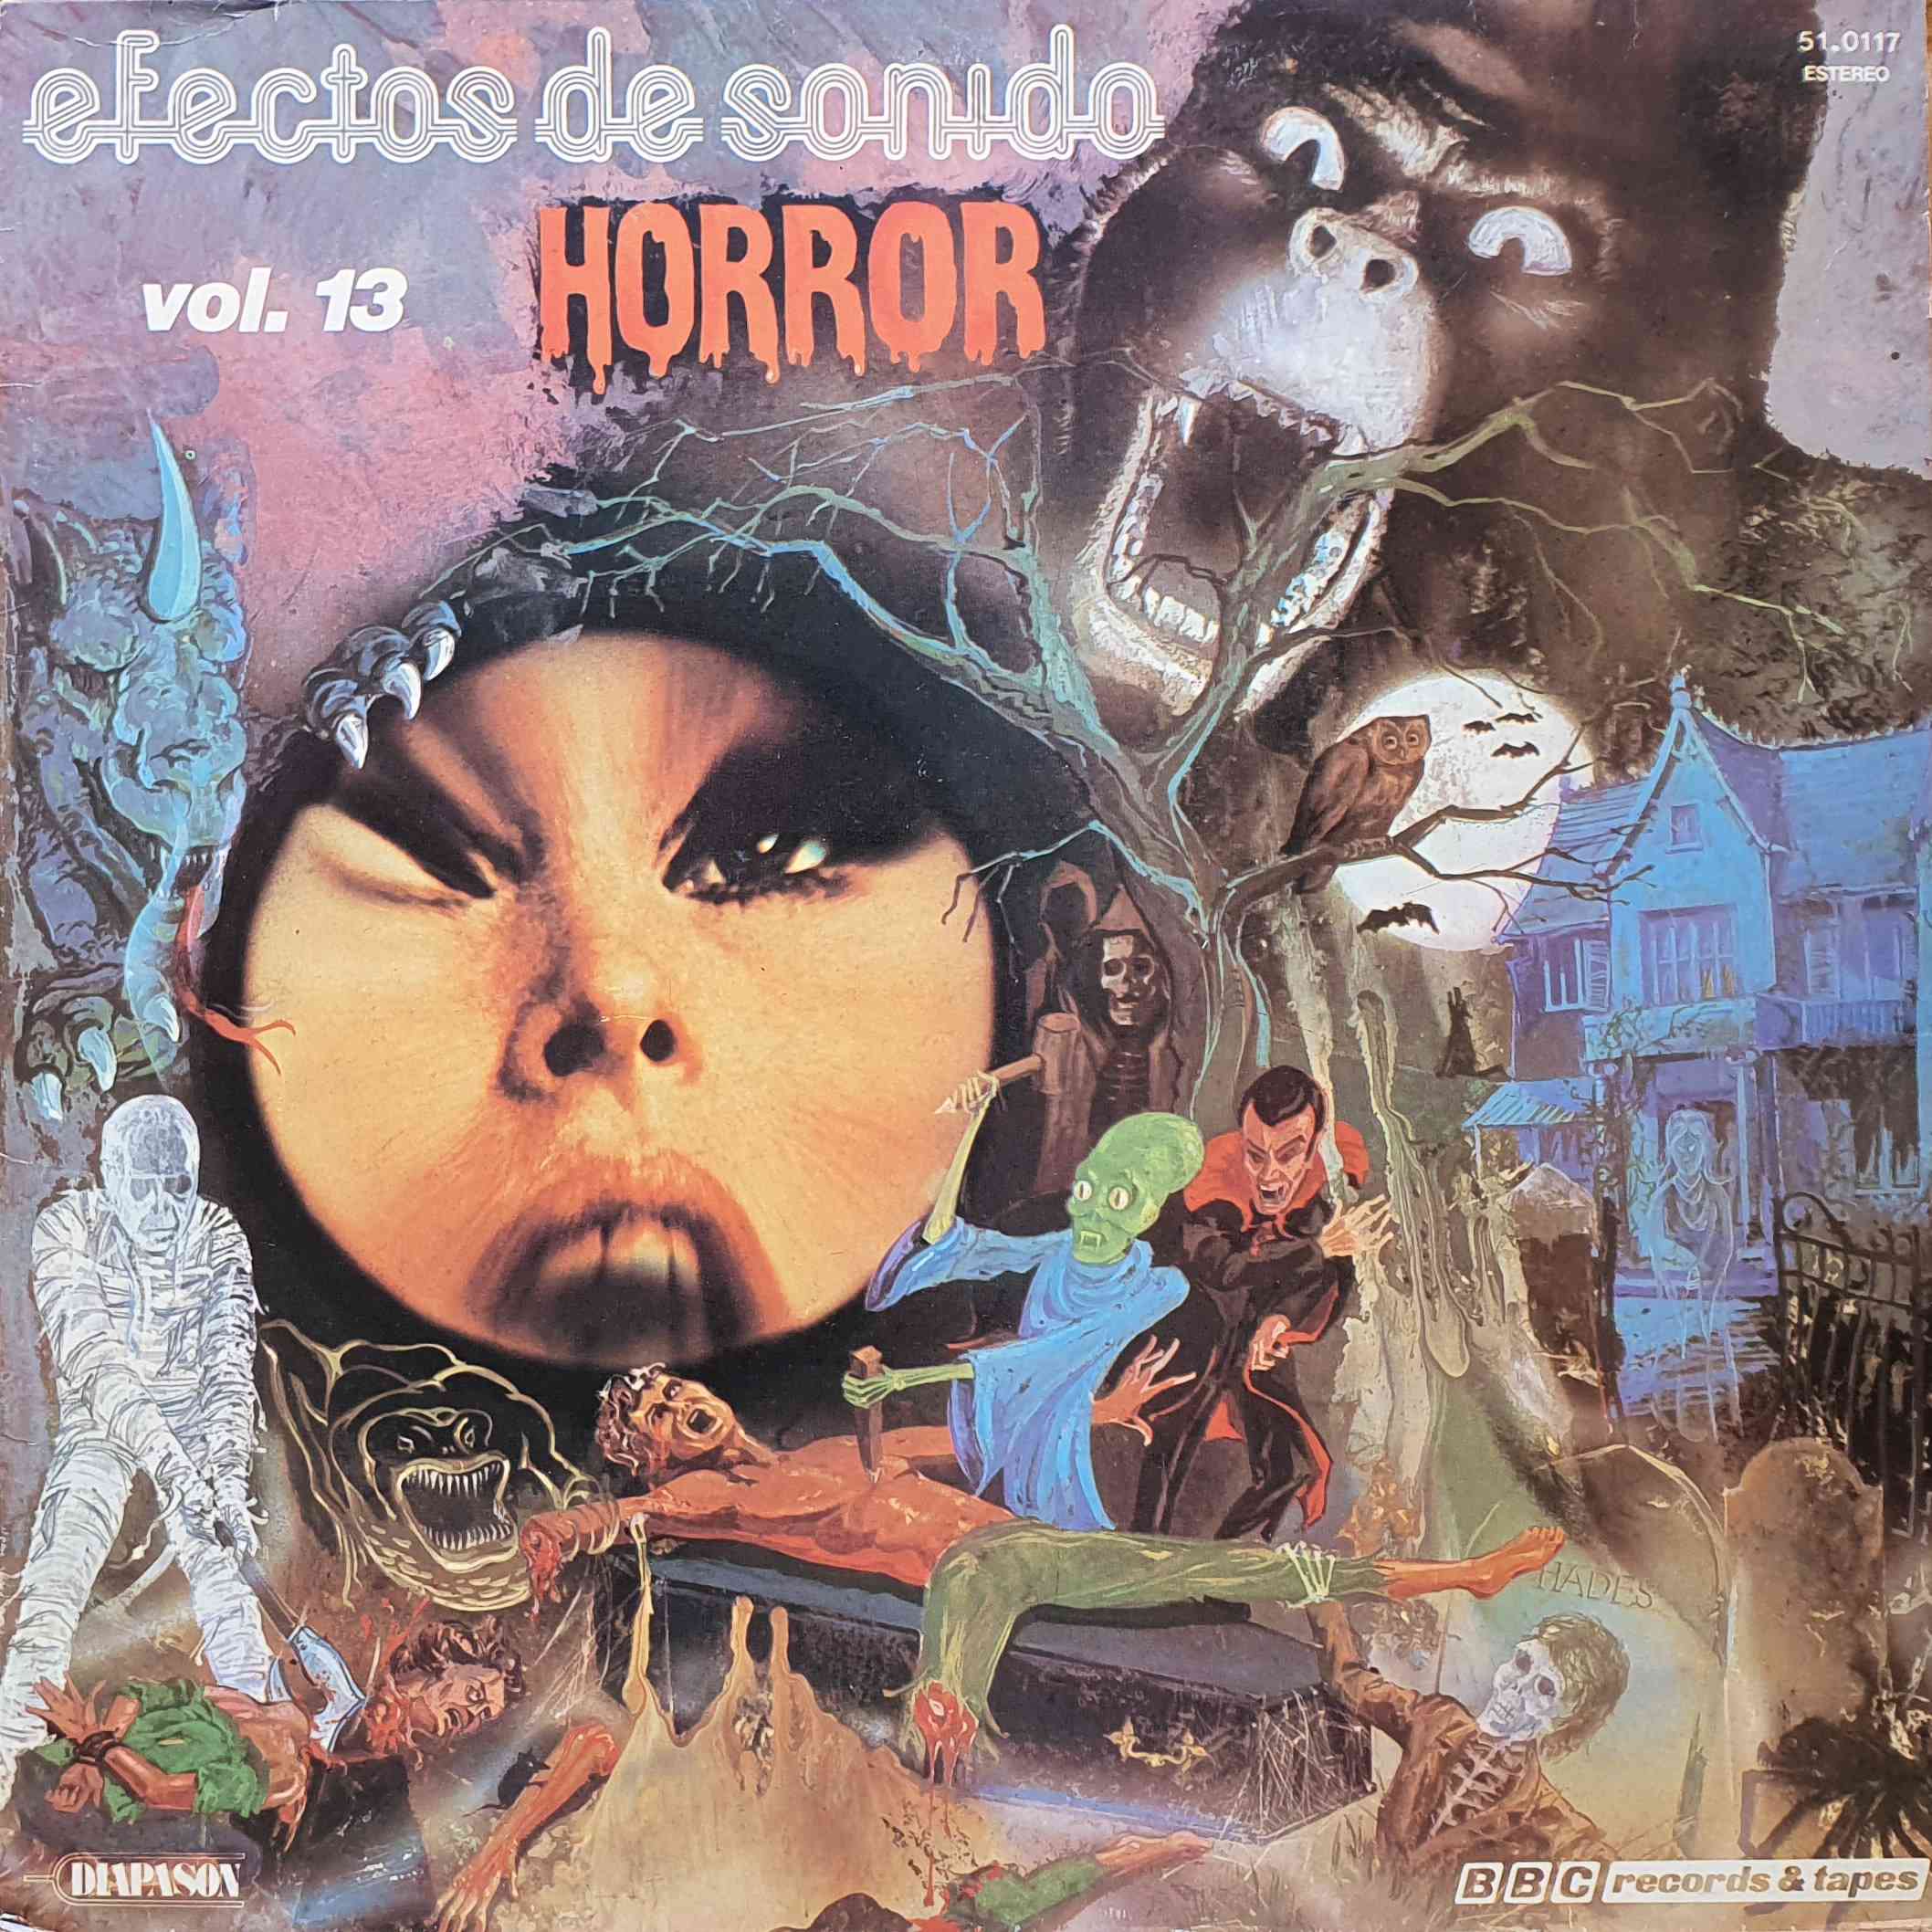 Picture of Efectos de sonido Vol.13 Horror by artist Various from the BBC albums - Records and Tapes library